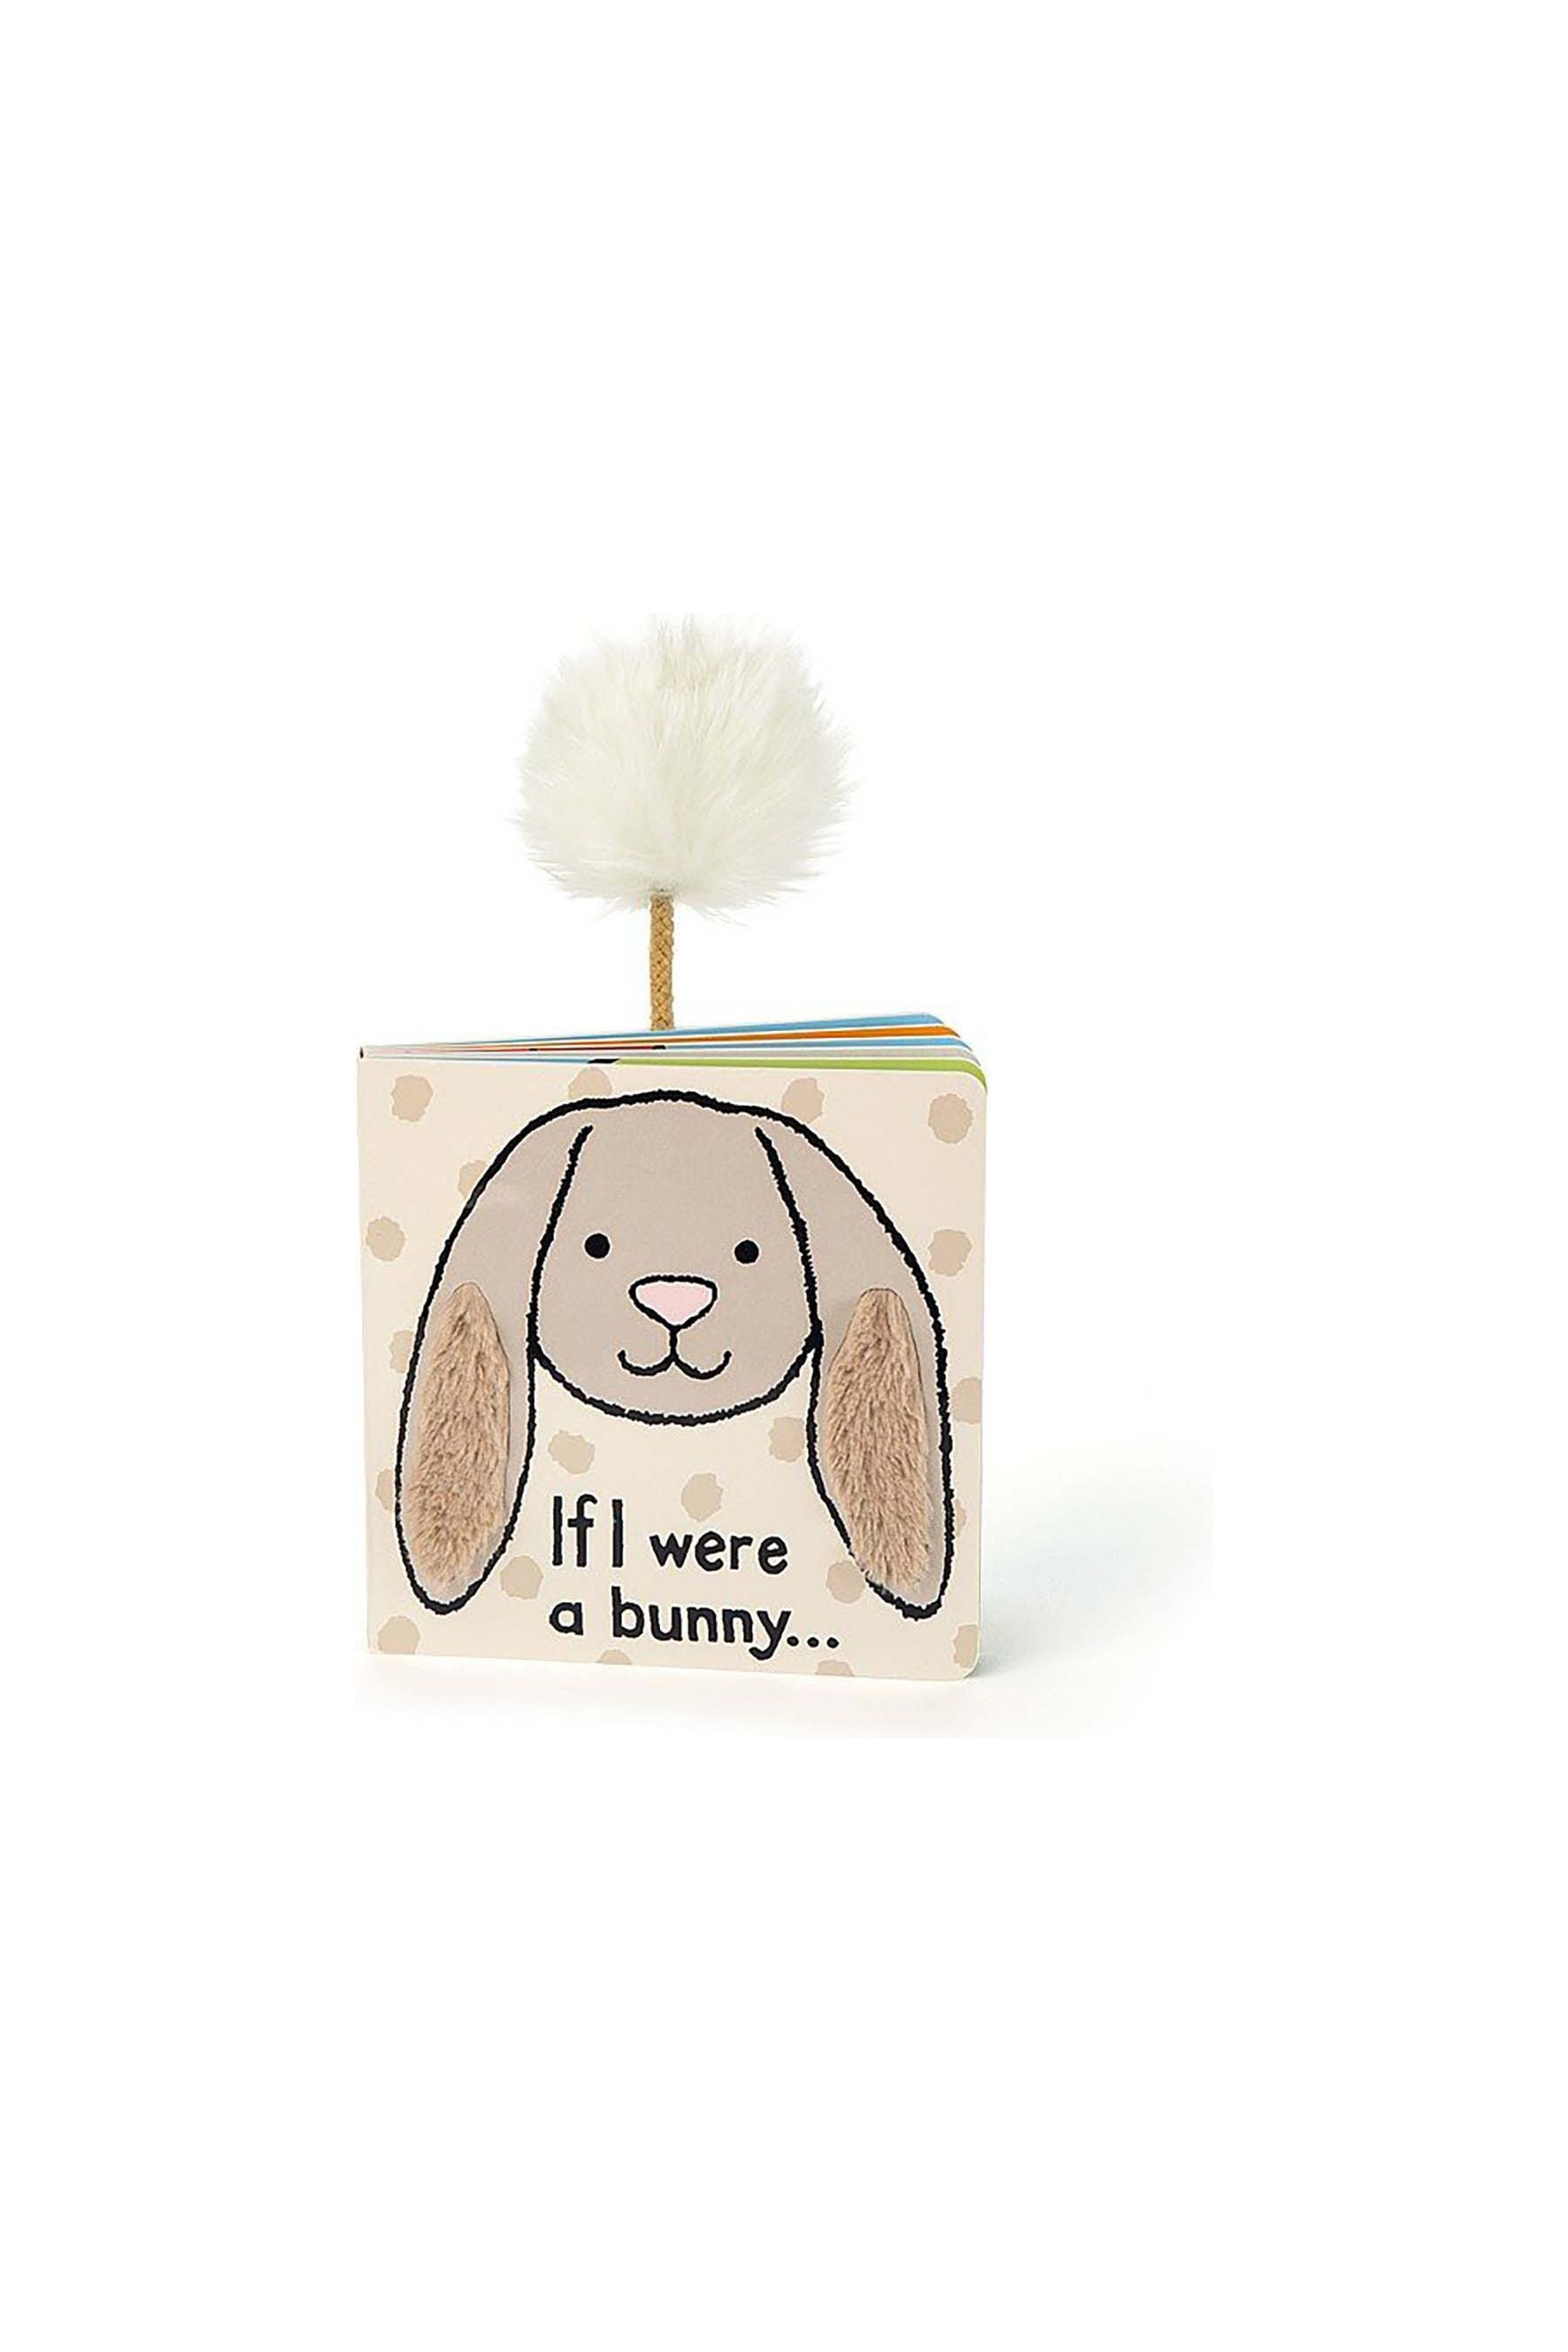 Jellycat Books - If I were a bunny